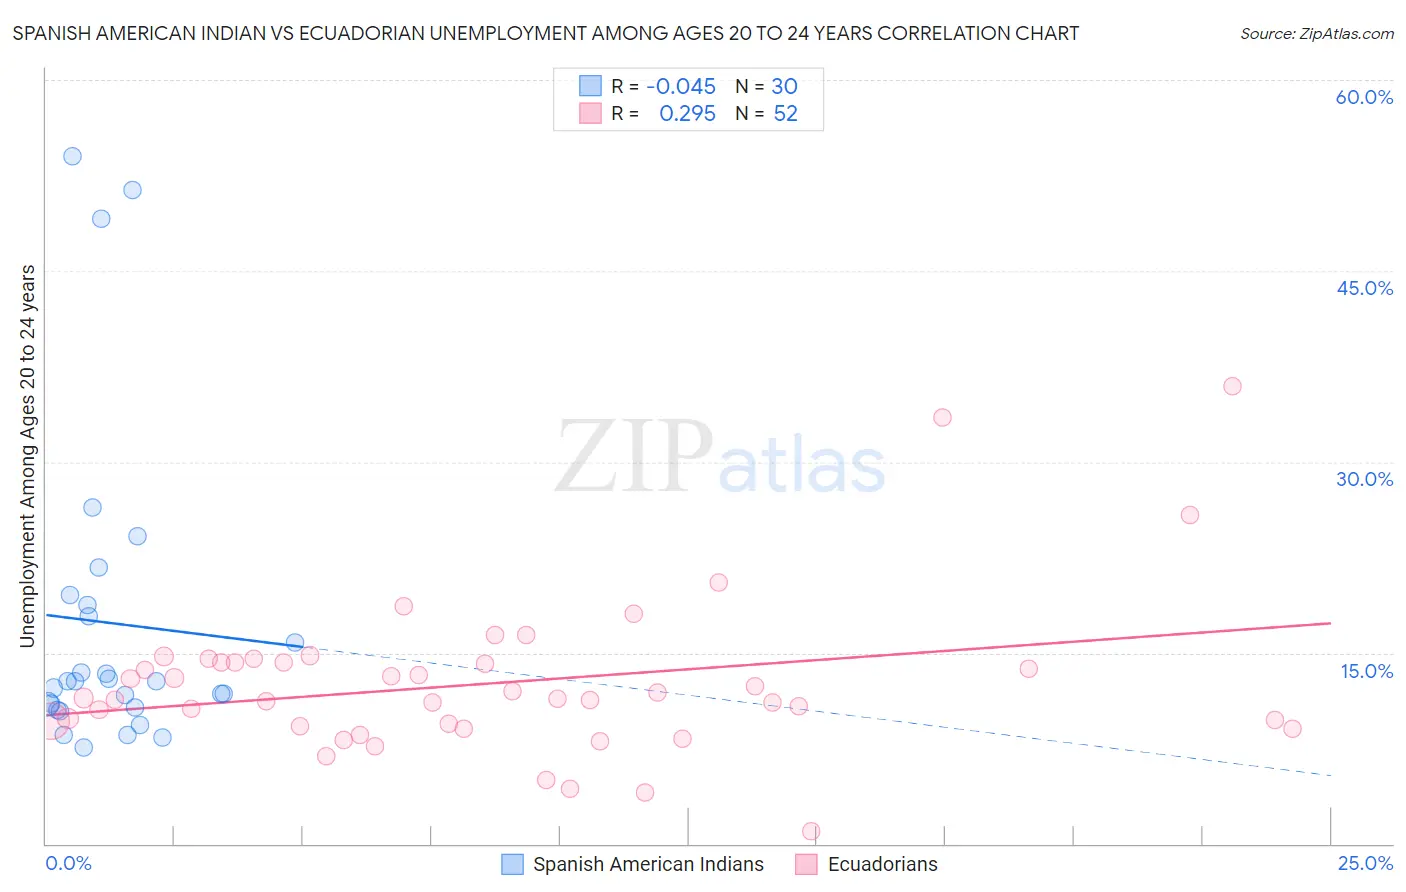 Spanish American Indian vs Ecuadorian Unemployment Among Ages 20 to 24 years